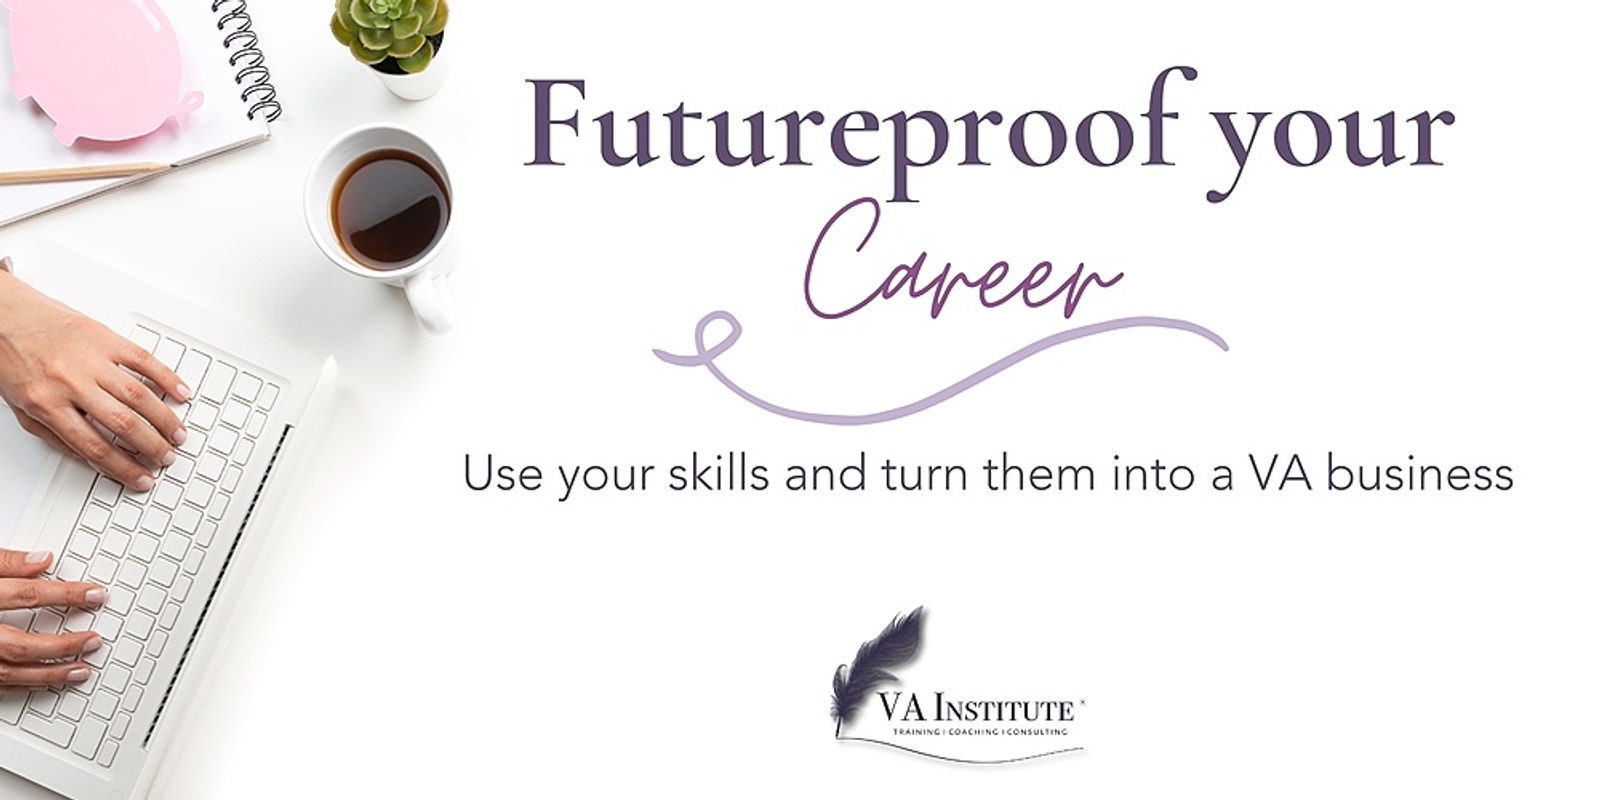 Futureproof your Career: Use your skills and turn them into a VA business